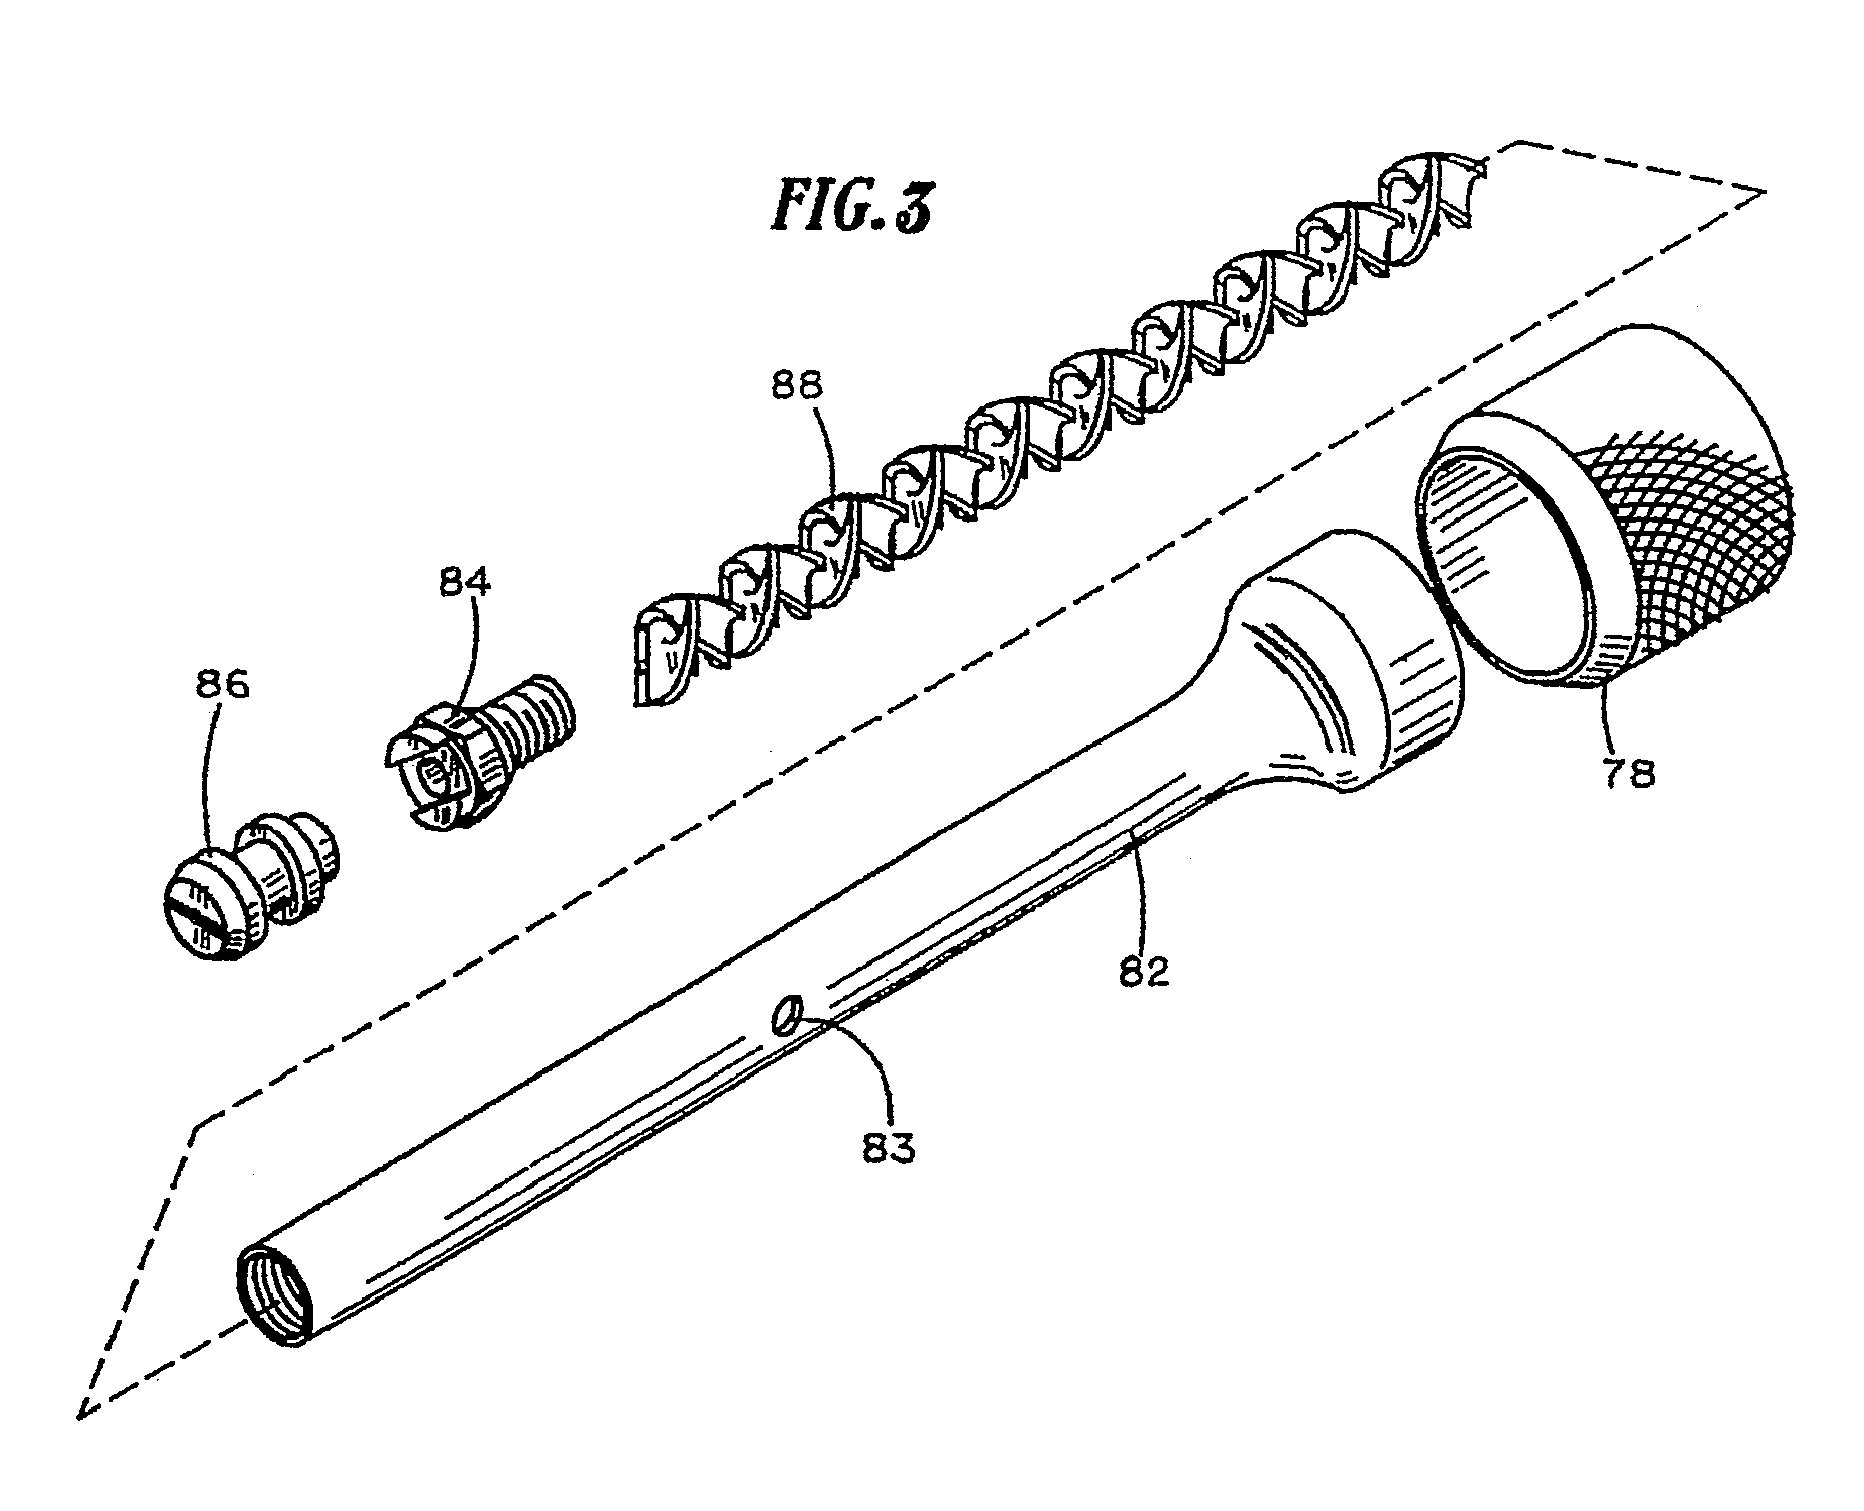 Method of using a spray gun and material produced thereby